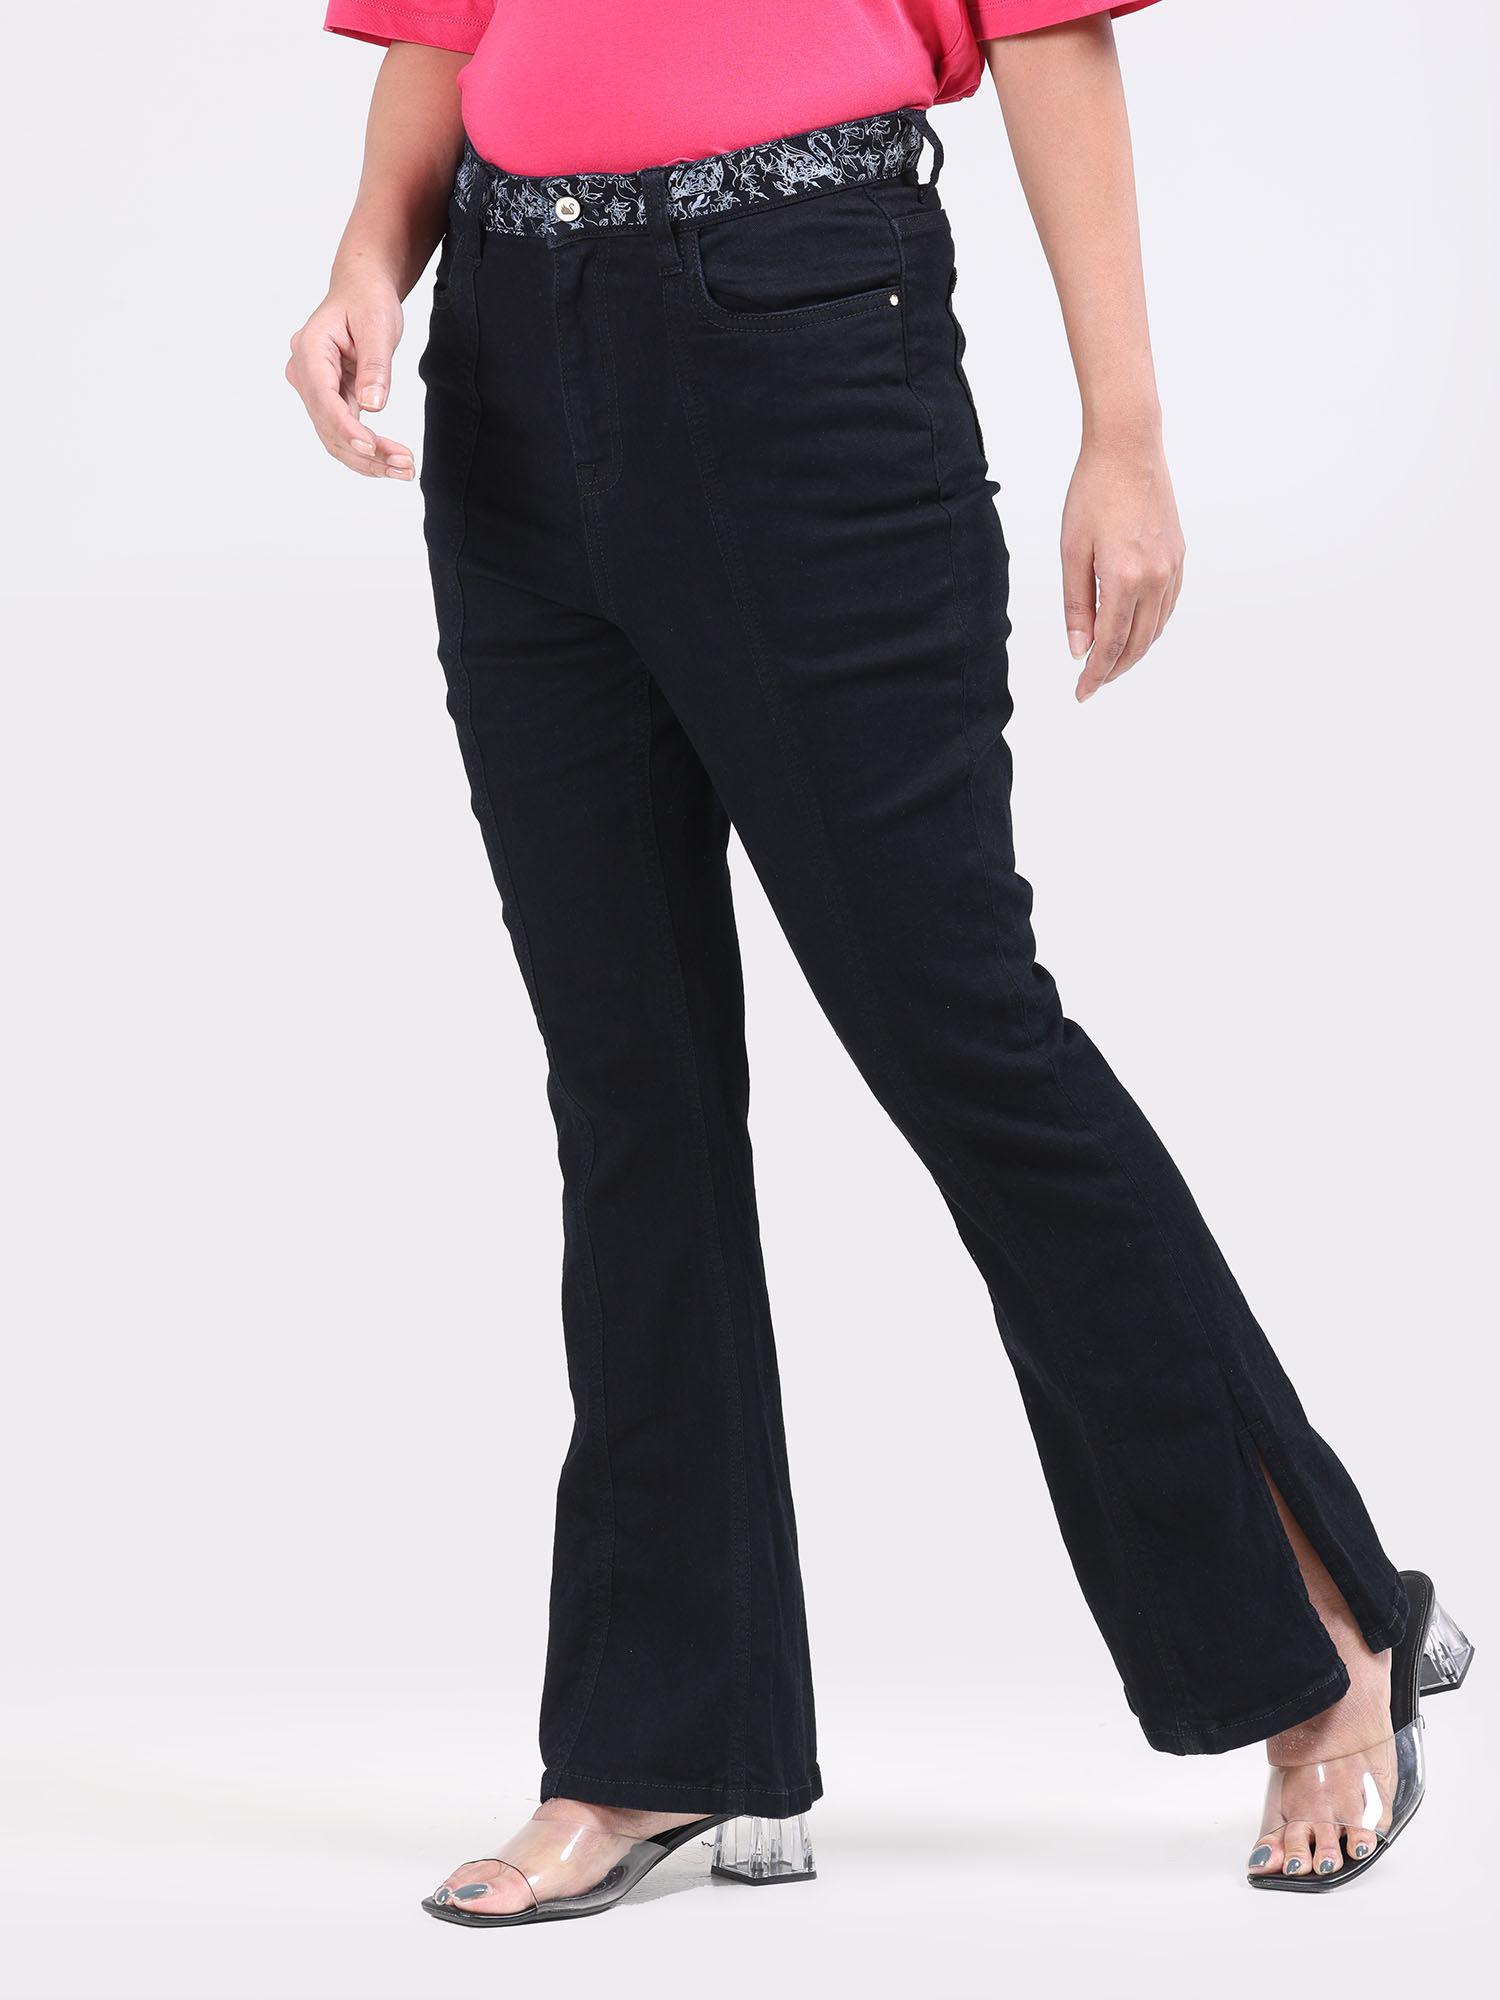 black high waist boot cut jeans with side slit and cut and sew